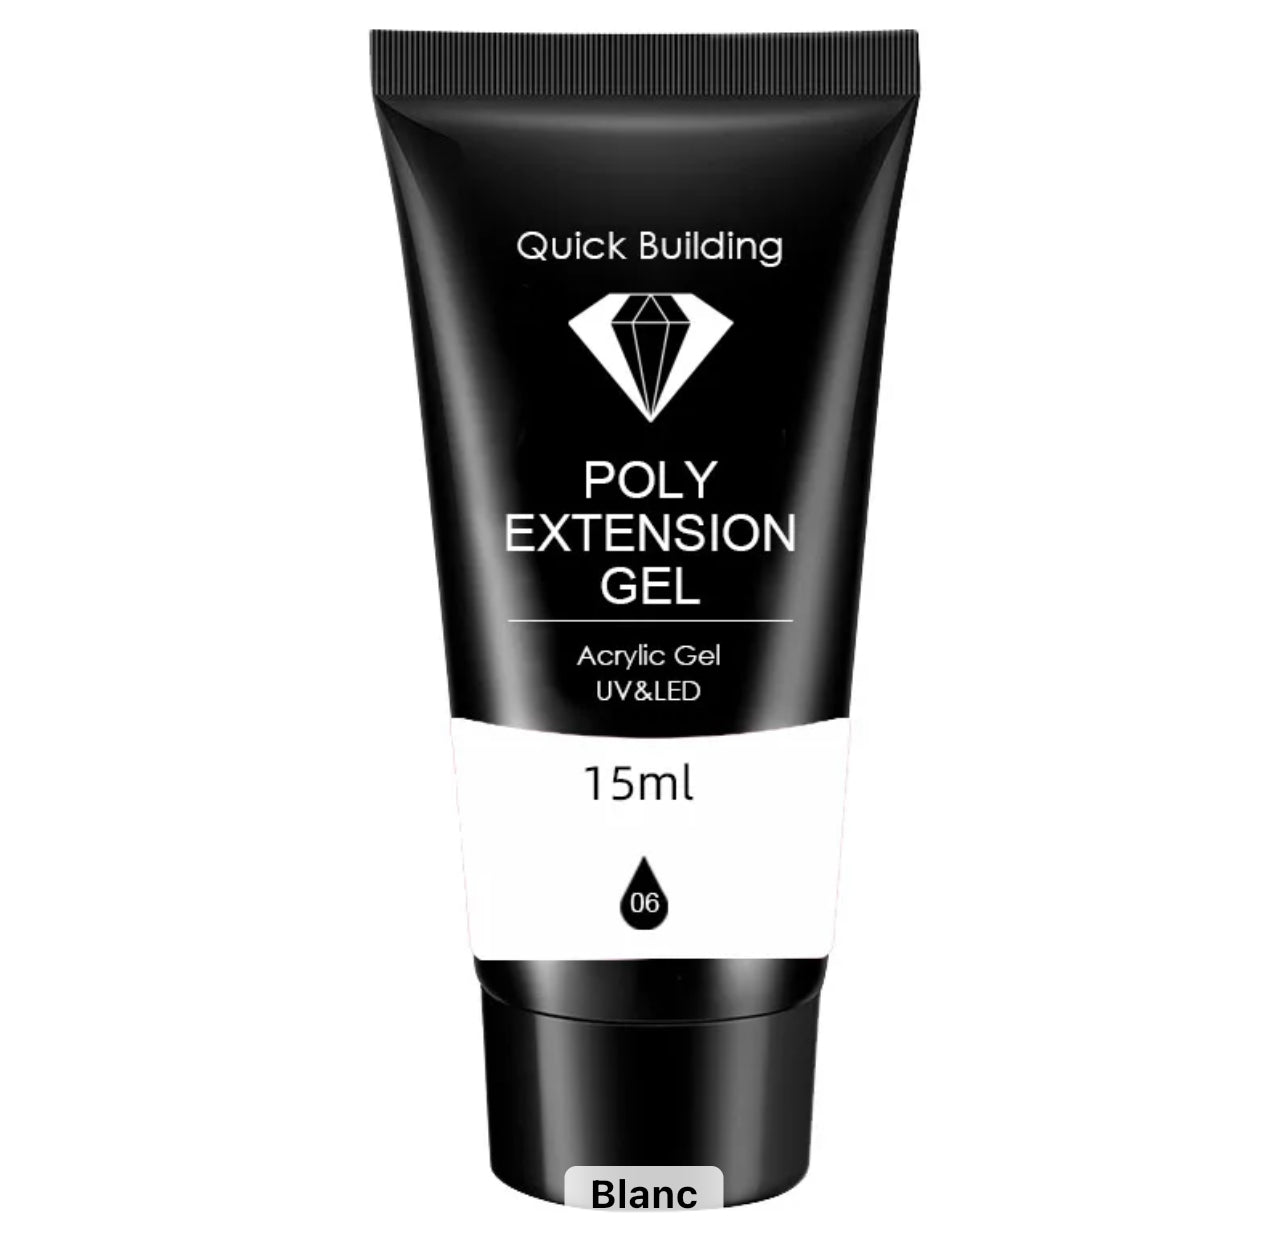 Poly gel extension